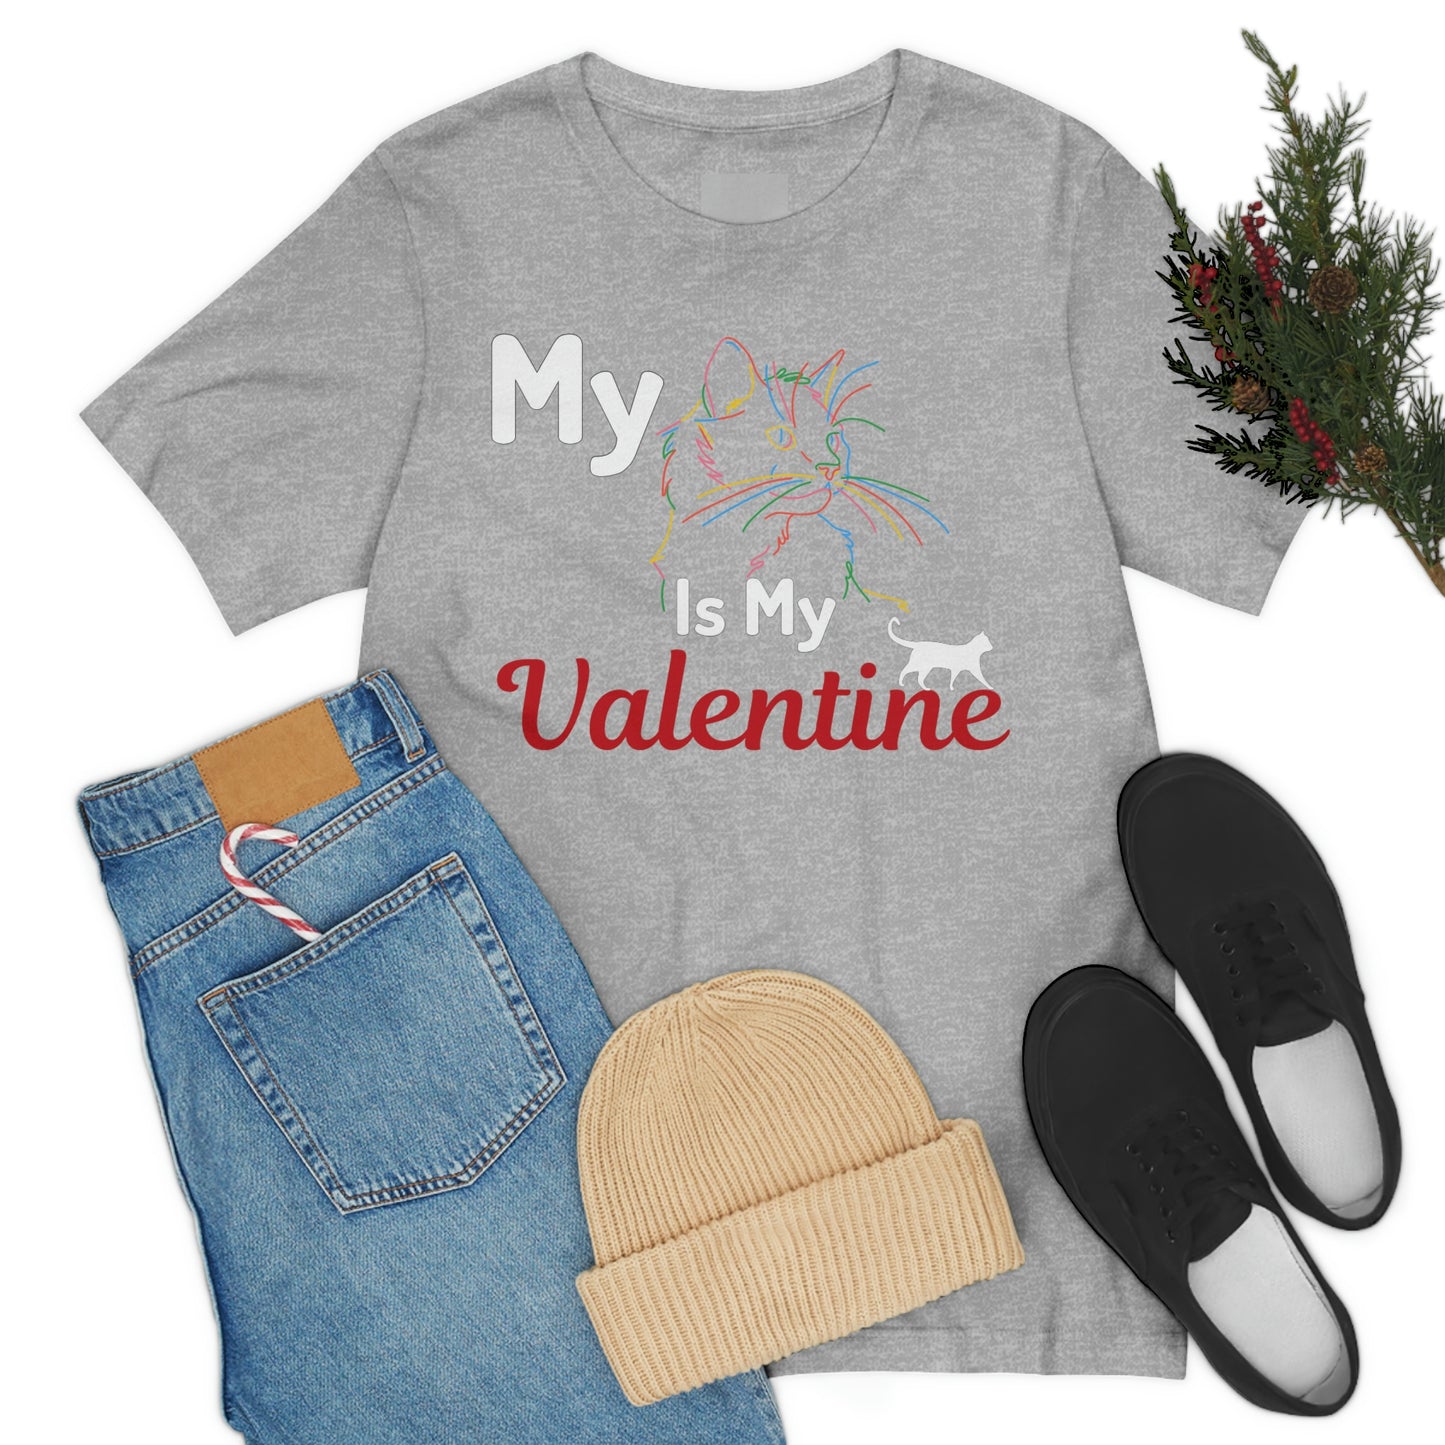 My Cat is My Valentine, Cute Pet lover Valentine shirt - Cute Cat lover shirt - Cat Mom shirt